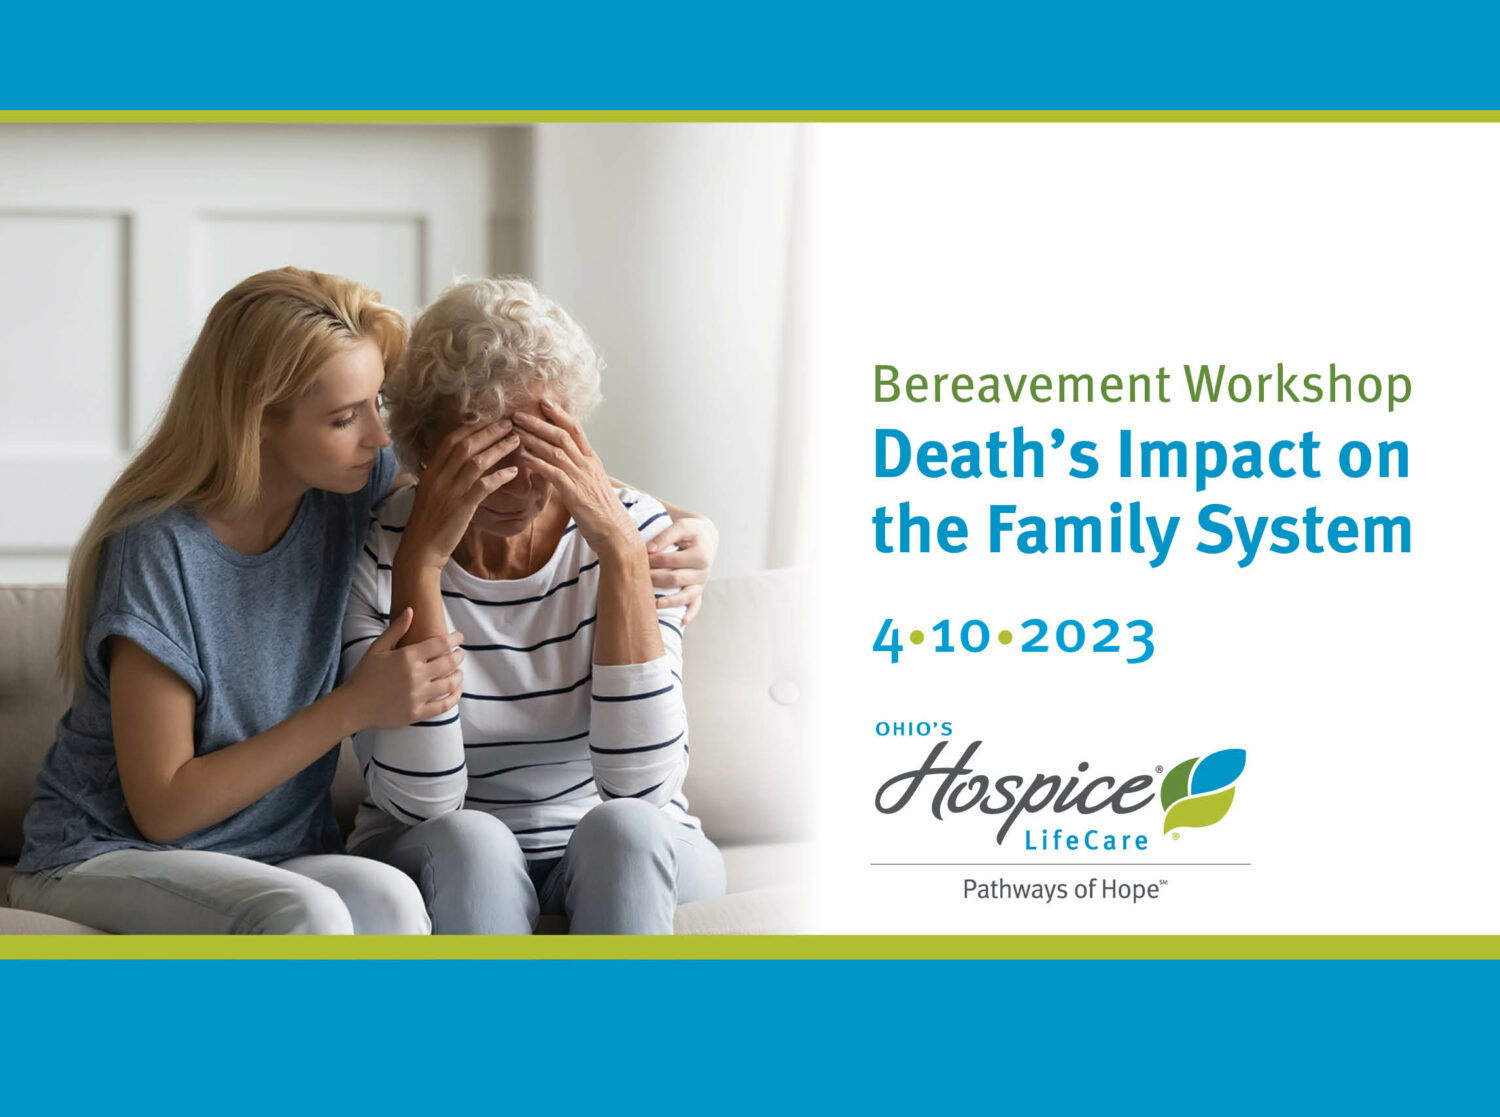 Bereavement Workshop. Death's Impact on the Family System. 04/10/23. Ohio's Hospice Pathways of Hope